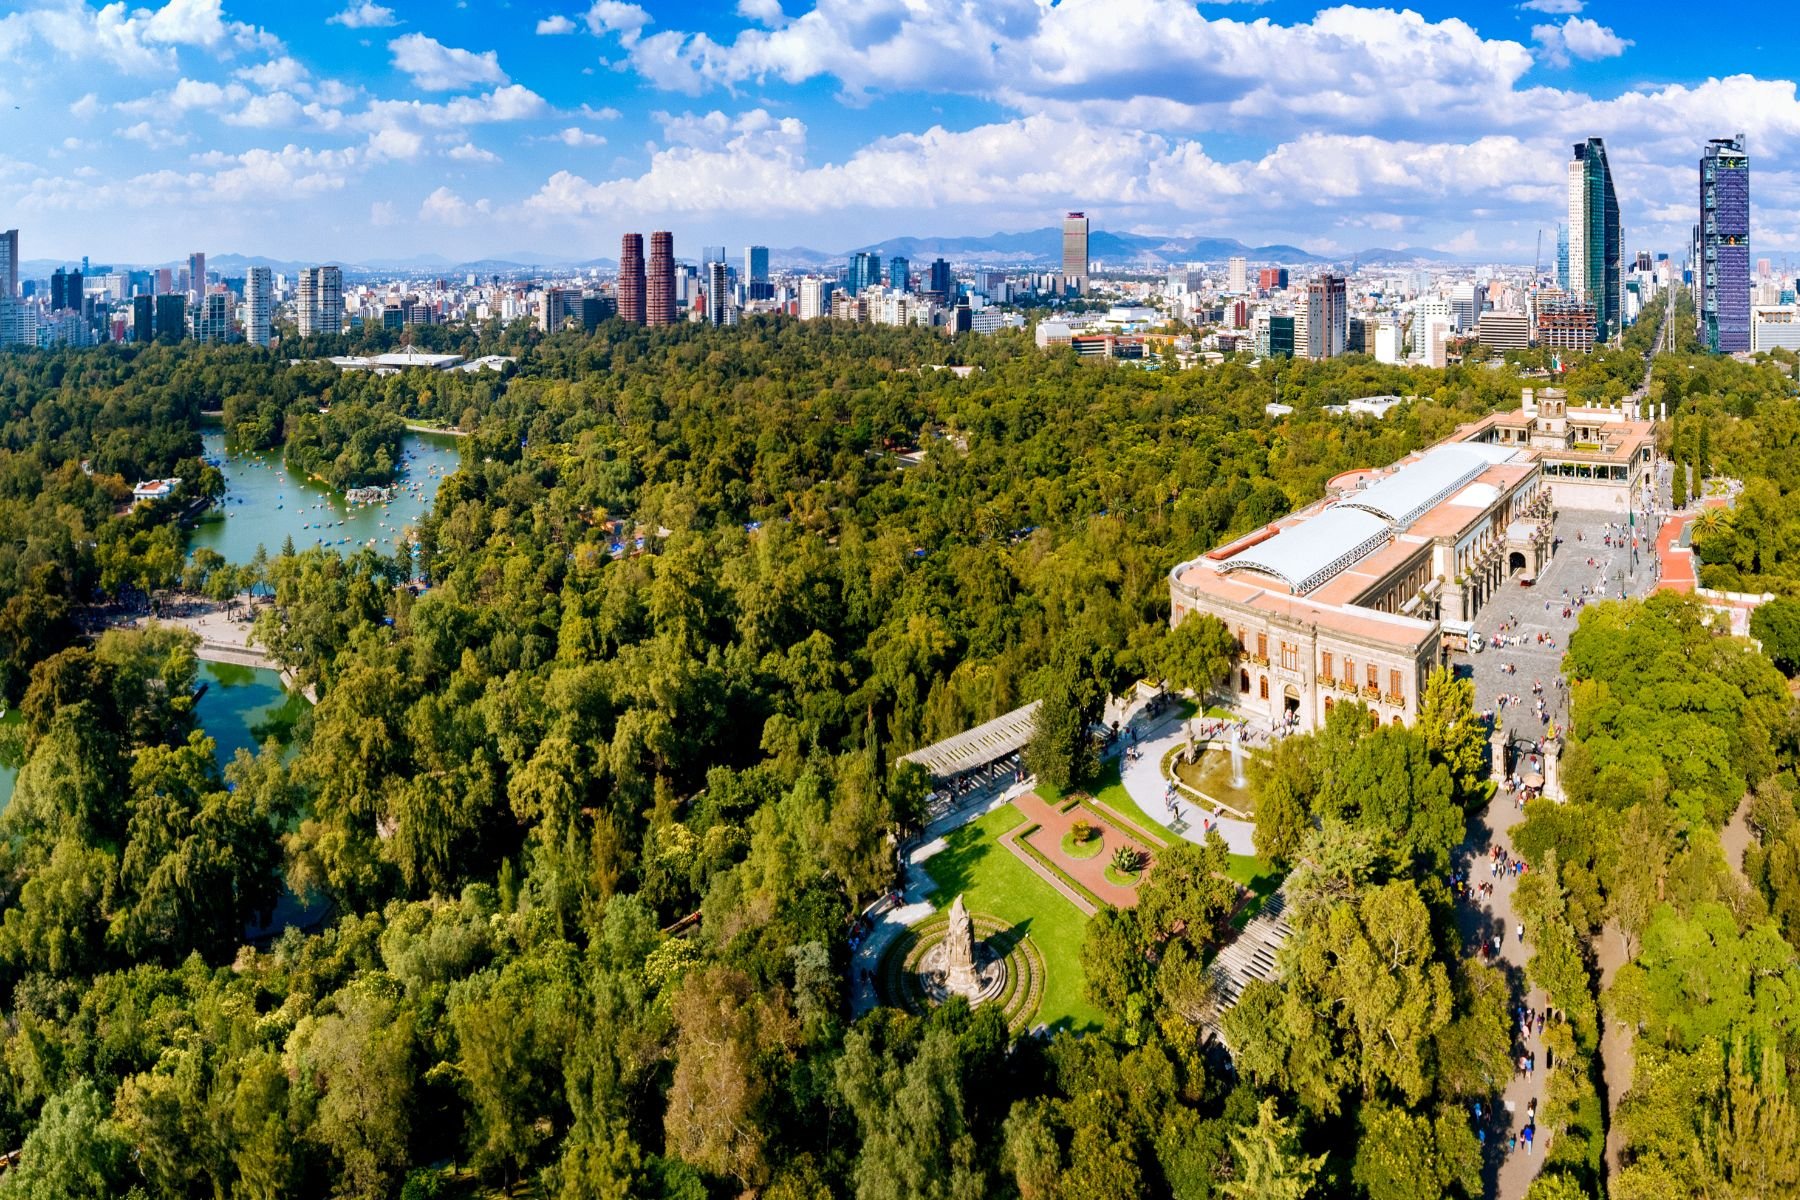 mexico city itinerary- visit the Chapultepec park, one of the worlds's largest urban parks, This park is larger than central park in New York City